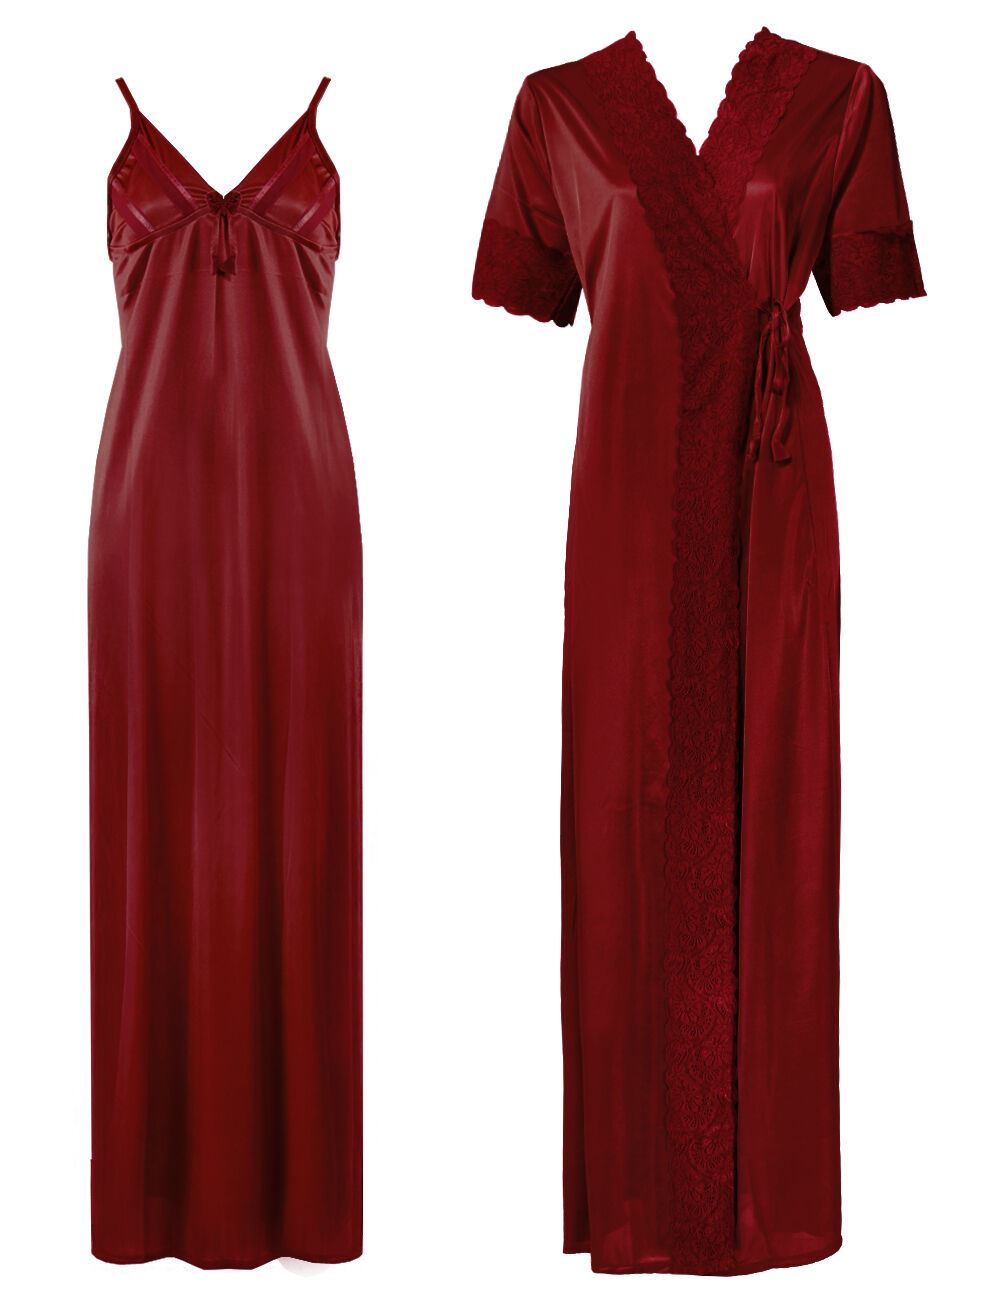 Deep Red / One Size: Regular (8-14) Satin Strappy Long Nighty With Dressing Gown / Robe The Orange Tags